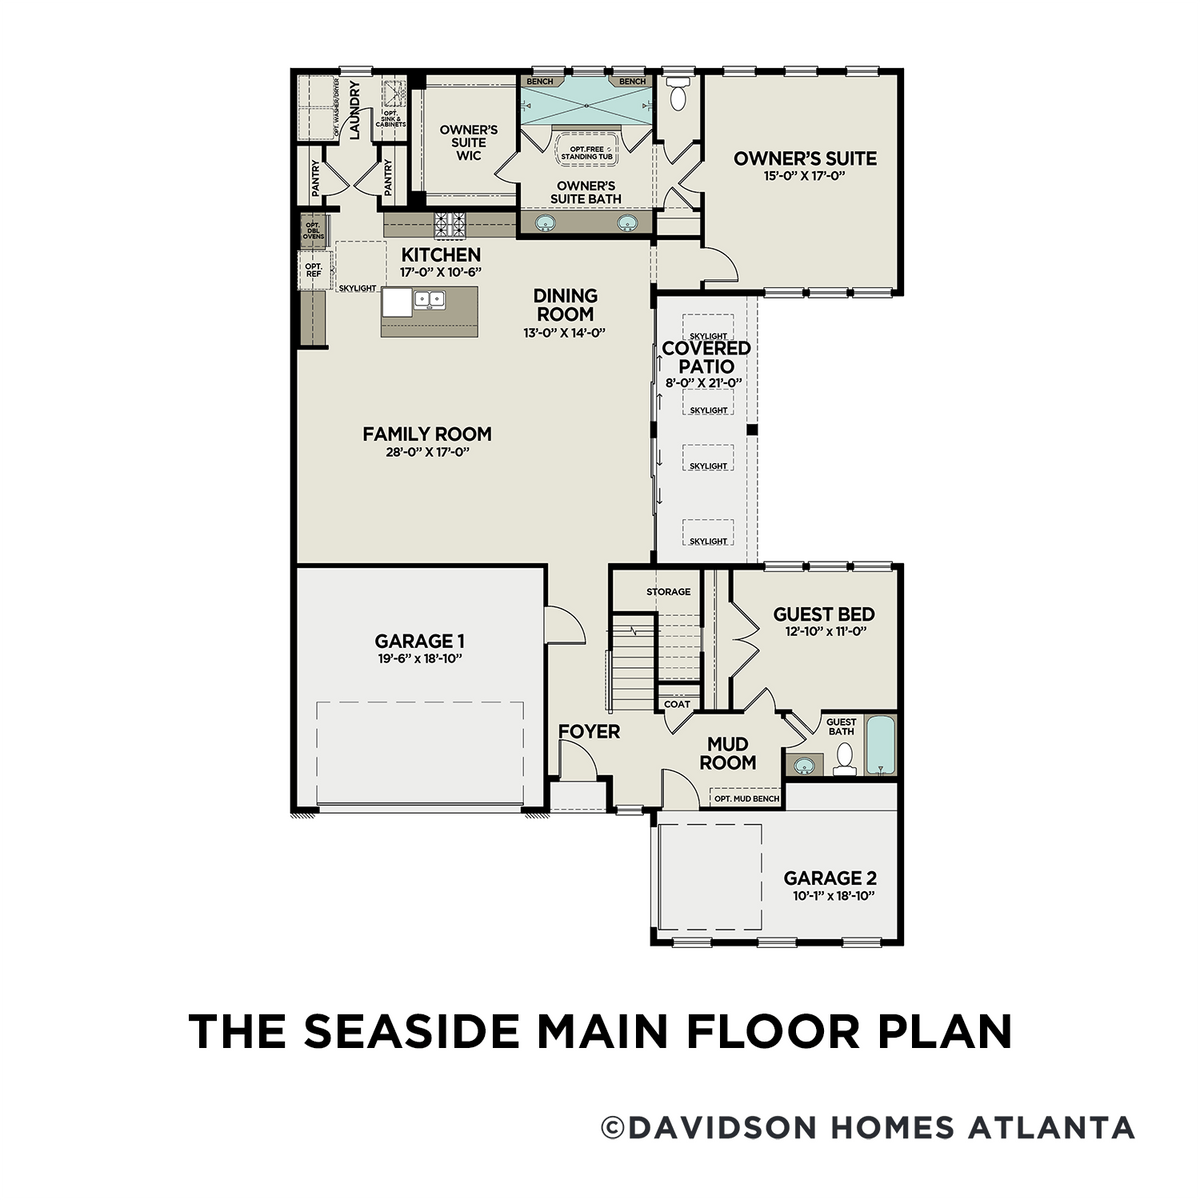 1 - The Seaside A floor plan layout for 89 Batten Board Way in Davidson Homes' The Village at Towne Lake community.